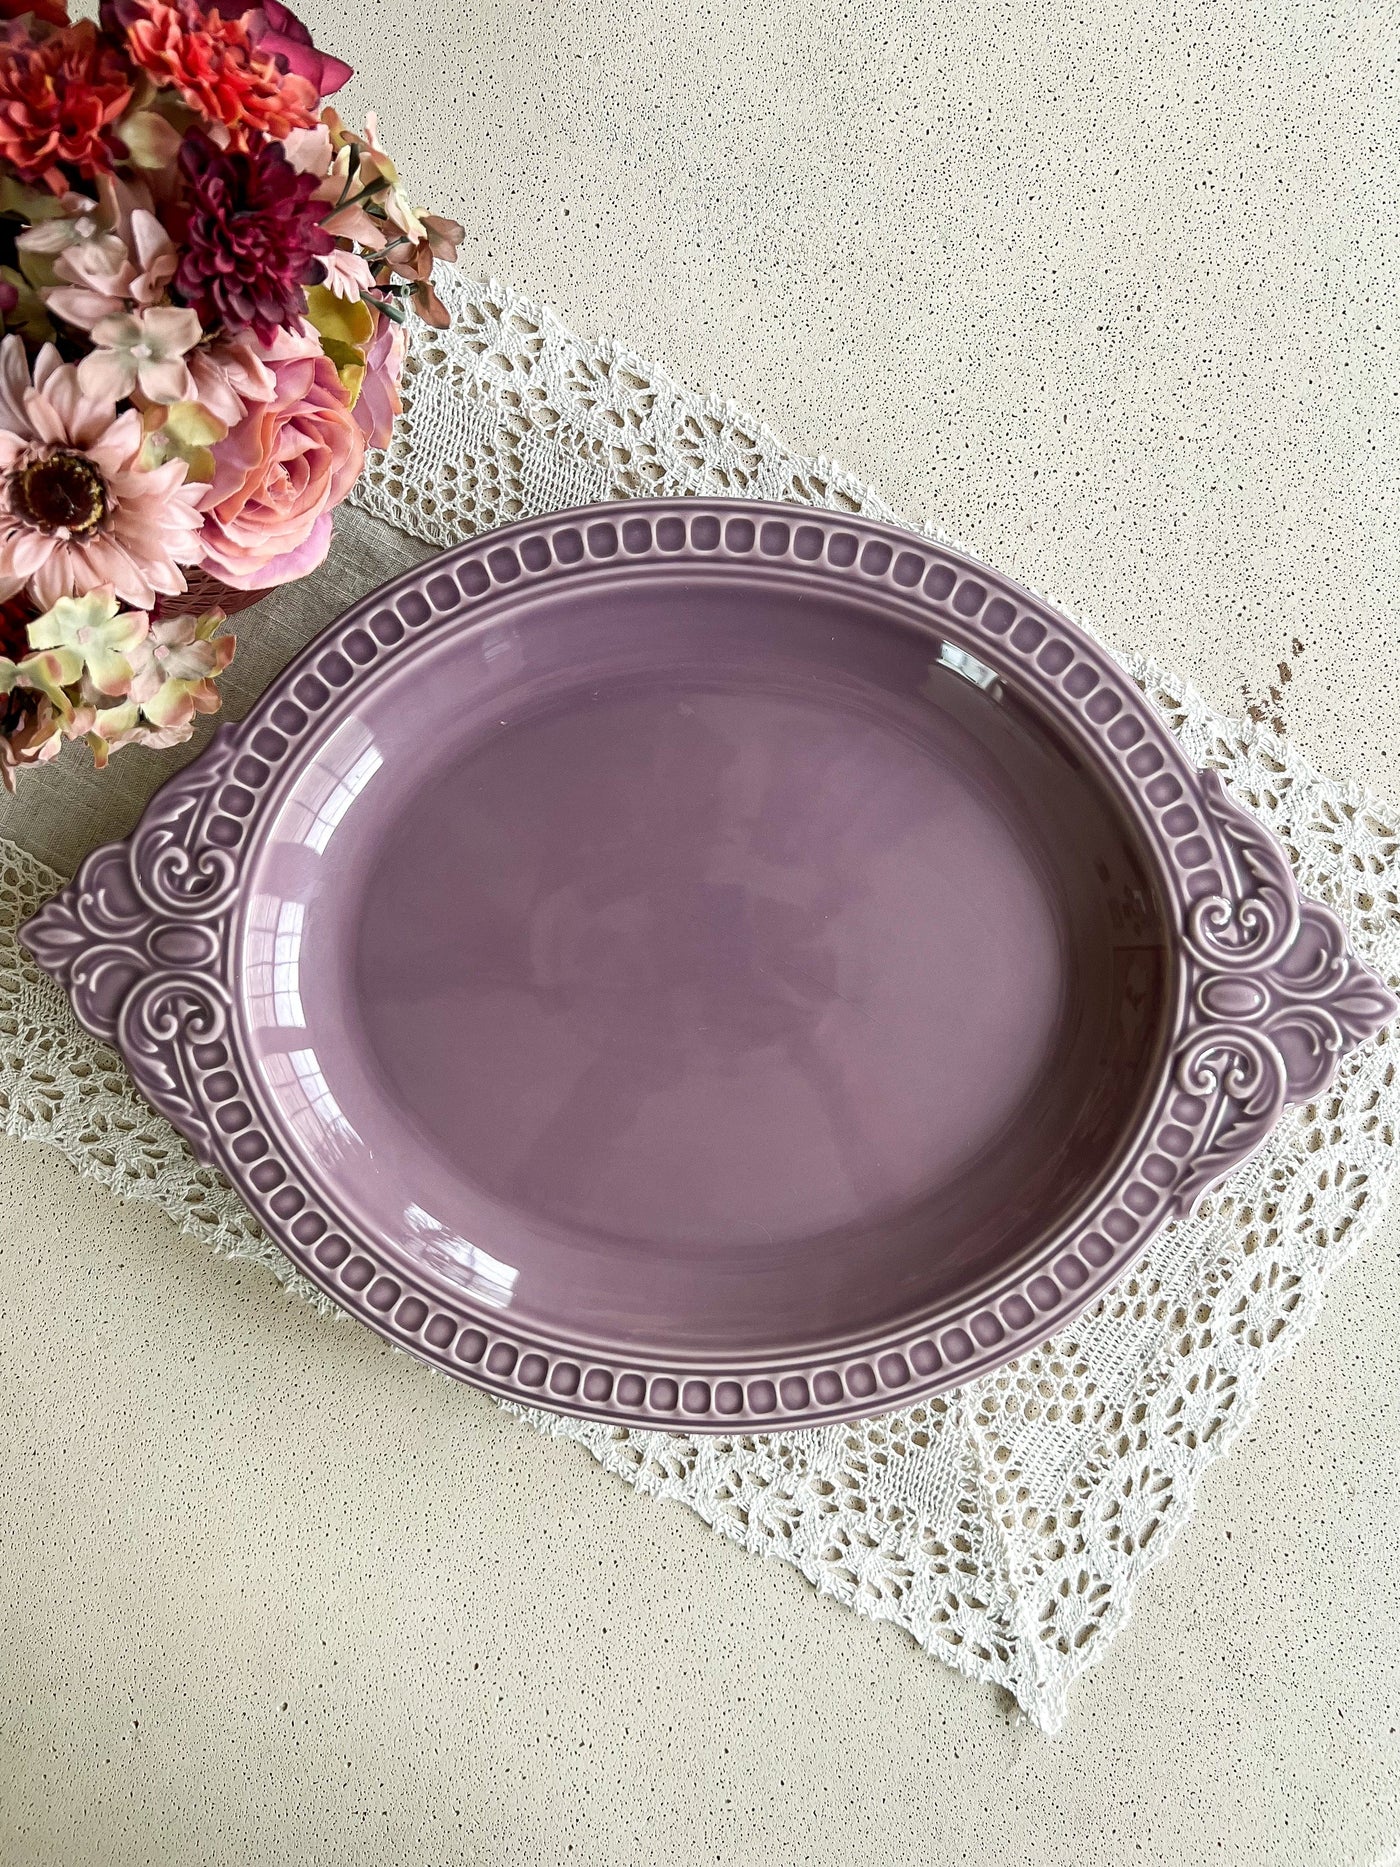 DUSTY PURPLE DETAILED CERAMIC TRAY Revive In Style Vintage Furniture Painted Refinished Redesign Beautiful One of a Kind Artistic Antique Unique Home Decor Interior Design French Country Shabby Chic Cottage Farmhouse Grandmillenial Coastal Chalk Paint Metallic Glam Eclectic Quality Dovetailed Rustic Furniture Painter Pinterest Bedroom Living Room Entryway Kitchen Home Trends House Styles Decorating ideas